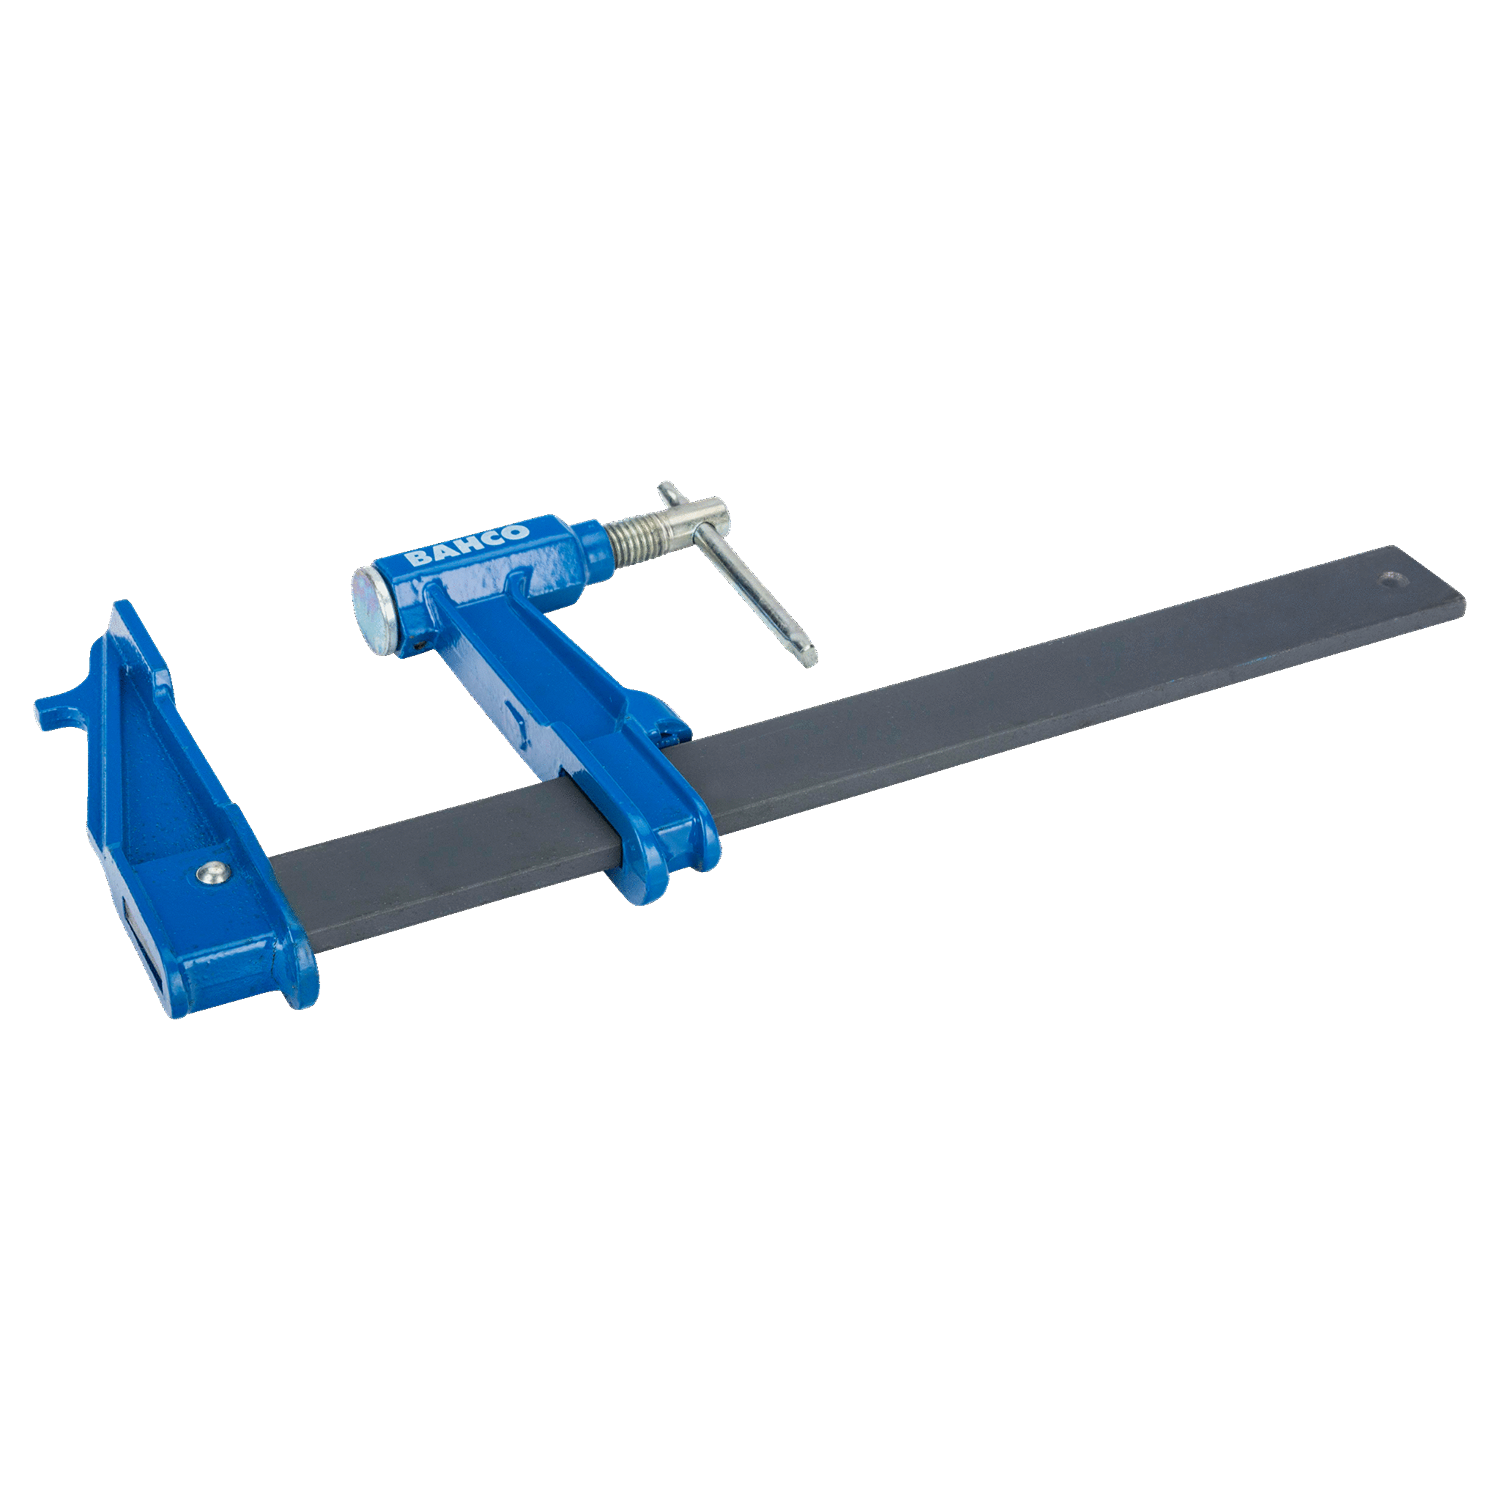 BAHCO 3067 F-Clamp with Steel T-Handle 120 mm (BAHCO Tools) - Premium F-Clamp from BAHCO - Shop now at Yew Aik.